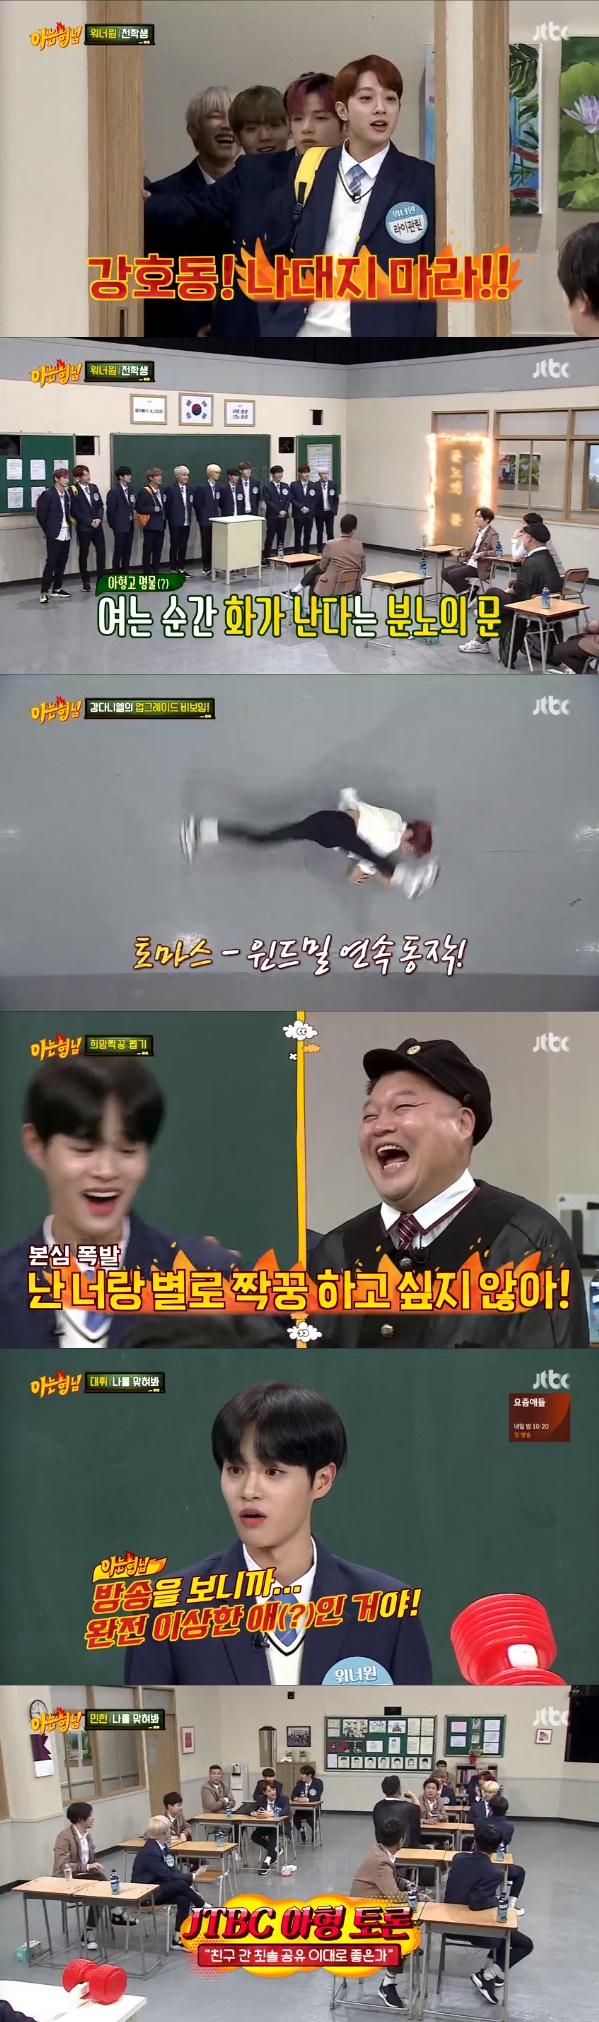 Wanna One members went to play at my brothers school as if today was the last.Once again, Wanna One came to JTBC Men on a Mission which was broadcast on the night of the first night.As soon as he opened the classroom door, he entered the classroom with a radical concept, shouting Kang Ho-dong! Do not touch me!I do not know why, but it was not only Rygwanlin that appeared in the concept of anger, and Kim Hee-chul said, Im sorry...Why are you angry as soon as you come?For some reason, so far, the transfer students of my brothers school have often entered the classroom by arguing with Kang Ho-dong.When he appeared in the past, he said that it was difficult to talk to his brothers and treat his brothers. I am trying to work hard because I have been enthusiastic as I was last time.My brothers praised me for increasing my skill, but Kim Young-chul said, I will win even if I fight with Kyung-hoon. So I asked him to come out later.So an instant argument unfolded, and the top model, Li Kwanlin, did not know what to do after using both of the attacks he had prepared in advance.After Battle ended so blandly, Lee Sang-mins sudden proposal led to an impromptu verbal battle between Kyung-hoon and Min-hyun.I finished in one shot with a fan-sym attack.Intellect applied for a meringue battle for Lee Sang-min as part of a struggle to avoid a full-length edit.Lee Sang-min was almost breathless and won by whiffing with all his might; although defeated in Battle, the intellect escaped the full edit.In the Get Me Right corner, Jae-hwan said, It was impressive to hear the words What is the Ong Sung-woo? In the meantime, Min-hyun said, My sister suddenly said, Do Kyung-soo (Exo EXO D.O.)When are you going to show me? he said, saying he was embarrassed. Seo Jang-hoon said, Why suddenly?, and Lee Soo-geun said, People know that everyone in the entertainment industry is close, and Wanna One members expressed sympathy for all of this story.In the meantime, Minhyun replied, If your sister asks you to introduce Kyung-hoon, will you introduce her? Without hesitation, she replied, Kyung-hoon is a waste.Dae-hui said he had made someone very embarrassed, saying, How did you panic? The answer was that he was embarrassed by the security company staff.The employee was confused and said, You look pretty.Its like a new god, he said, disappearing after saying something, and Woojin, who watched the situation next to him at the time, recreated Dae-huis wink and said, Why did he want to do that?Dae-Hwi is embarrassed and usually has a lot of charms, so he explains that he does charm to people around him without knowing himself. Kang Ho-dong said, Why not to me?I asked, You are strangely unfriendly, and gave a shock.Originally, he was a stocking listener, and when he saw Kang Ho-dong victims coming to Men on a Mission, he changed his mind saying, Its a completely strange lover.Then, in the middle of the room, when the typist entered the classroom, Wanna Ones brothers rabbit ear gymnastics Battle was carried out.Winning at Battle, Wanna One ate chicken ferocity, while the typhoid exited coolly, saying I love Wanna One.After that, Tell Me started again, and Minhyuns turn came. Minhyun released a toothbrush episode saying that he had a heartbeat because of the nebula.He was surprised that the nebula was his toothbrush and he was still wearing Minhyuns toothbrush, and even Minhyun was surprised that the nebula wiped his tongue almost to the point where he was vomiting with a toothbrush.Seo Jang-hoon said, Min Hyun has to learn more yet. When there are many people, do not leave your toothbrush in the bathroom.Lee Sang-min said, So, Jang Hoon, if someone close to you used your toothbrush for two days and you used it. So whats going on with him?, and Seo Jang-hoon replied, Its going to get a lot away - this is the Top Model on my human rights.On the other hand, Kang Ho-dong and Lee Soo-geun often found out that they often used toothbrush Gong Yooo during their school days, causing Seo Jang-hoon to panic, and an untimely toothbrush Gong Yooo controversy unfolded.There was a moment when I felt like my mother is a good girl, Kang Daniel said.When Lee Soo-geun joked, My mother was really a chan, Kang replied, Thats right too, and was actually a spear thrower.The answer is that when the phone call came to an unknown number, I just refused to receive it coolly.When he was in junior high school, he was tired and slept at school, and Daniel woke up at ten oclock in the night, and finally he was caught crawling past to avoid the schoolmaster who was patrolling.The schoolteacher called her mother, but she said she did not answer the phone number she did not know.But while Daniel was talking about his mother, the voice actor suddenly punched his desk and stood up and said, Oh, really ...When the production team urgently said, Not yet! The voice actor sat down again with a shy expression.It was originally a contest that should have come out after Daniel had even talked about the voice actor, but it was the wrong timing.After that, the voice actor endured the embarrassment and once again performed the same performance, and the corner of Get Me went to the Knowing Dance Club 101 contest.